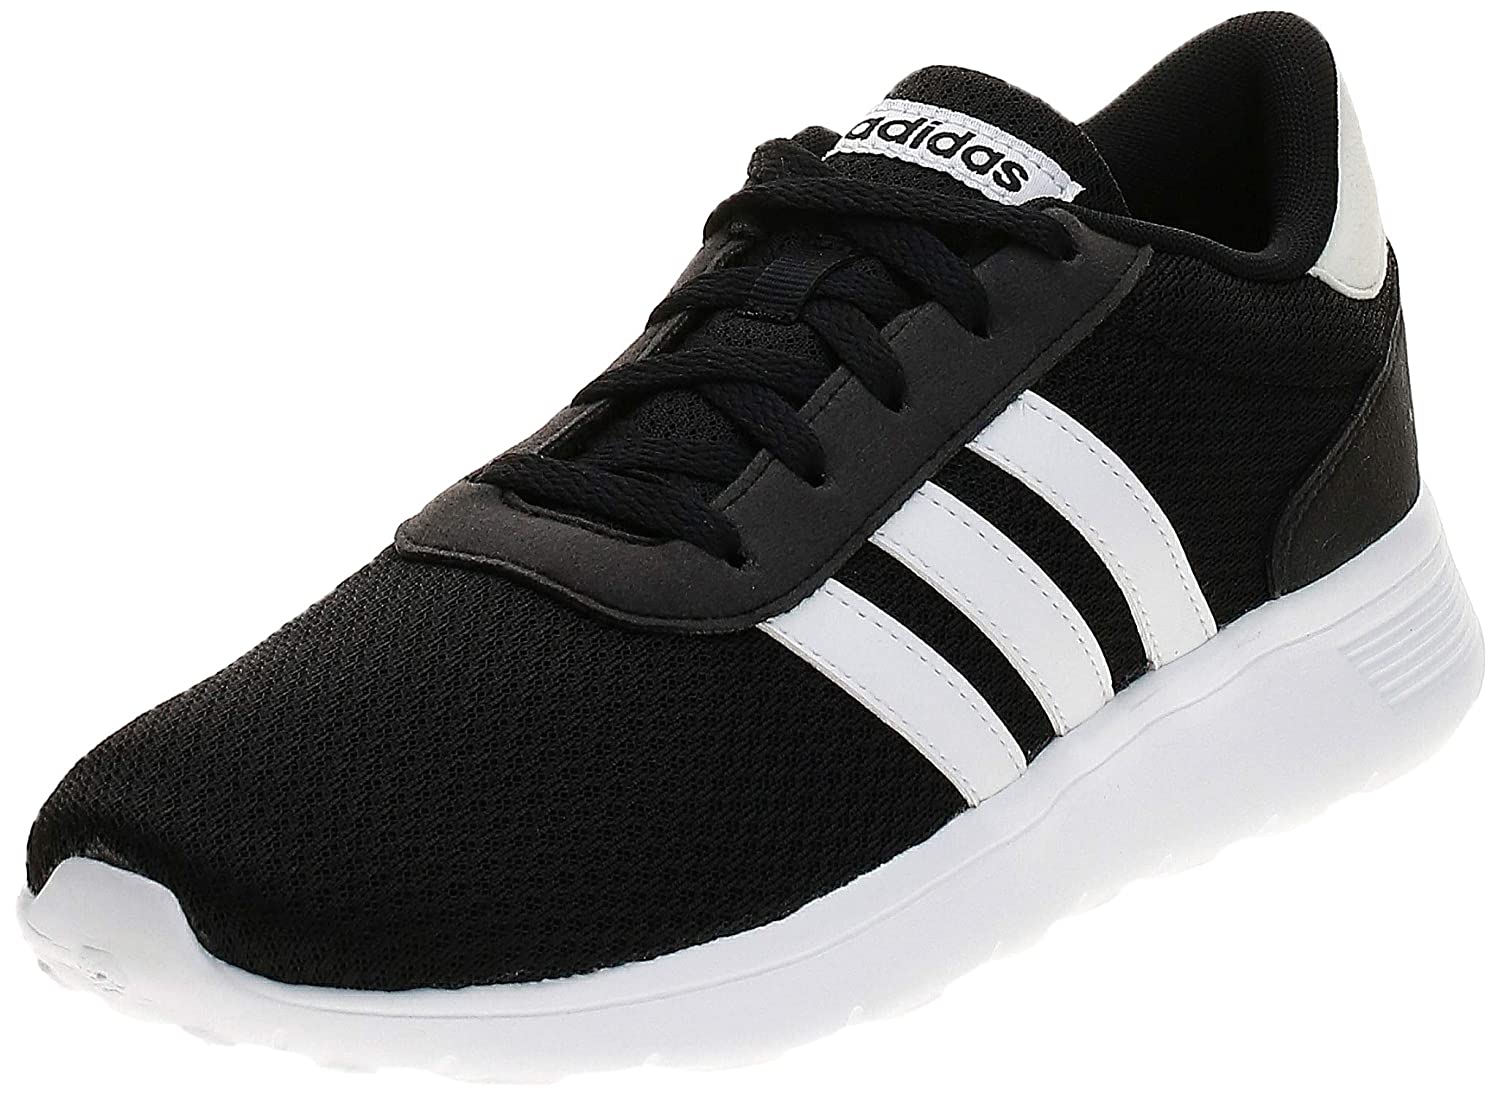 Amazon - Adidas Men's Lite Racer Running Shoes - Suggested Products